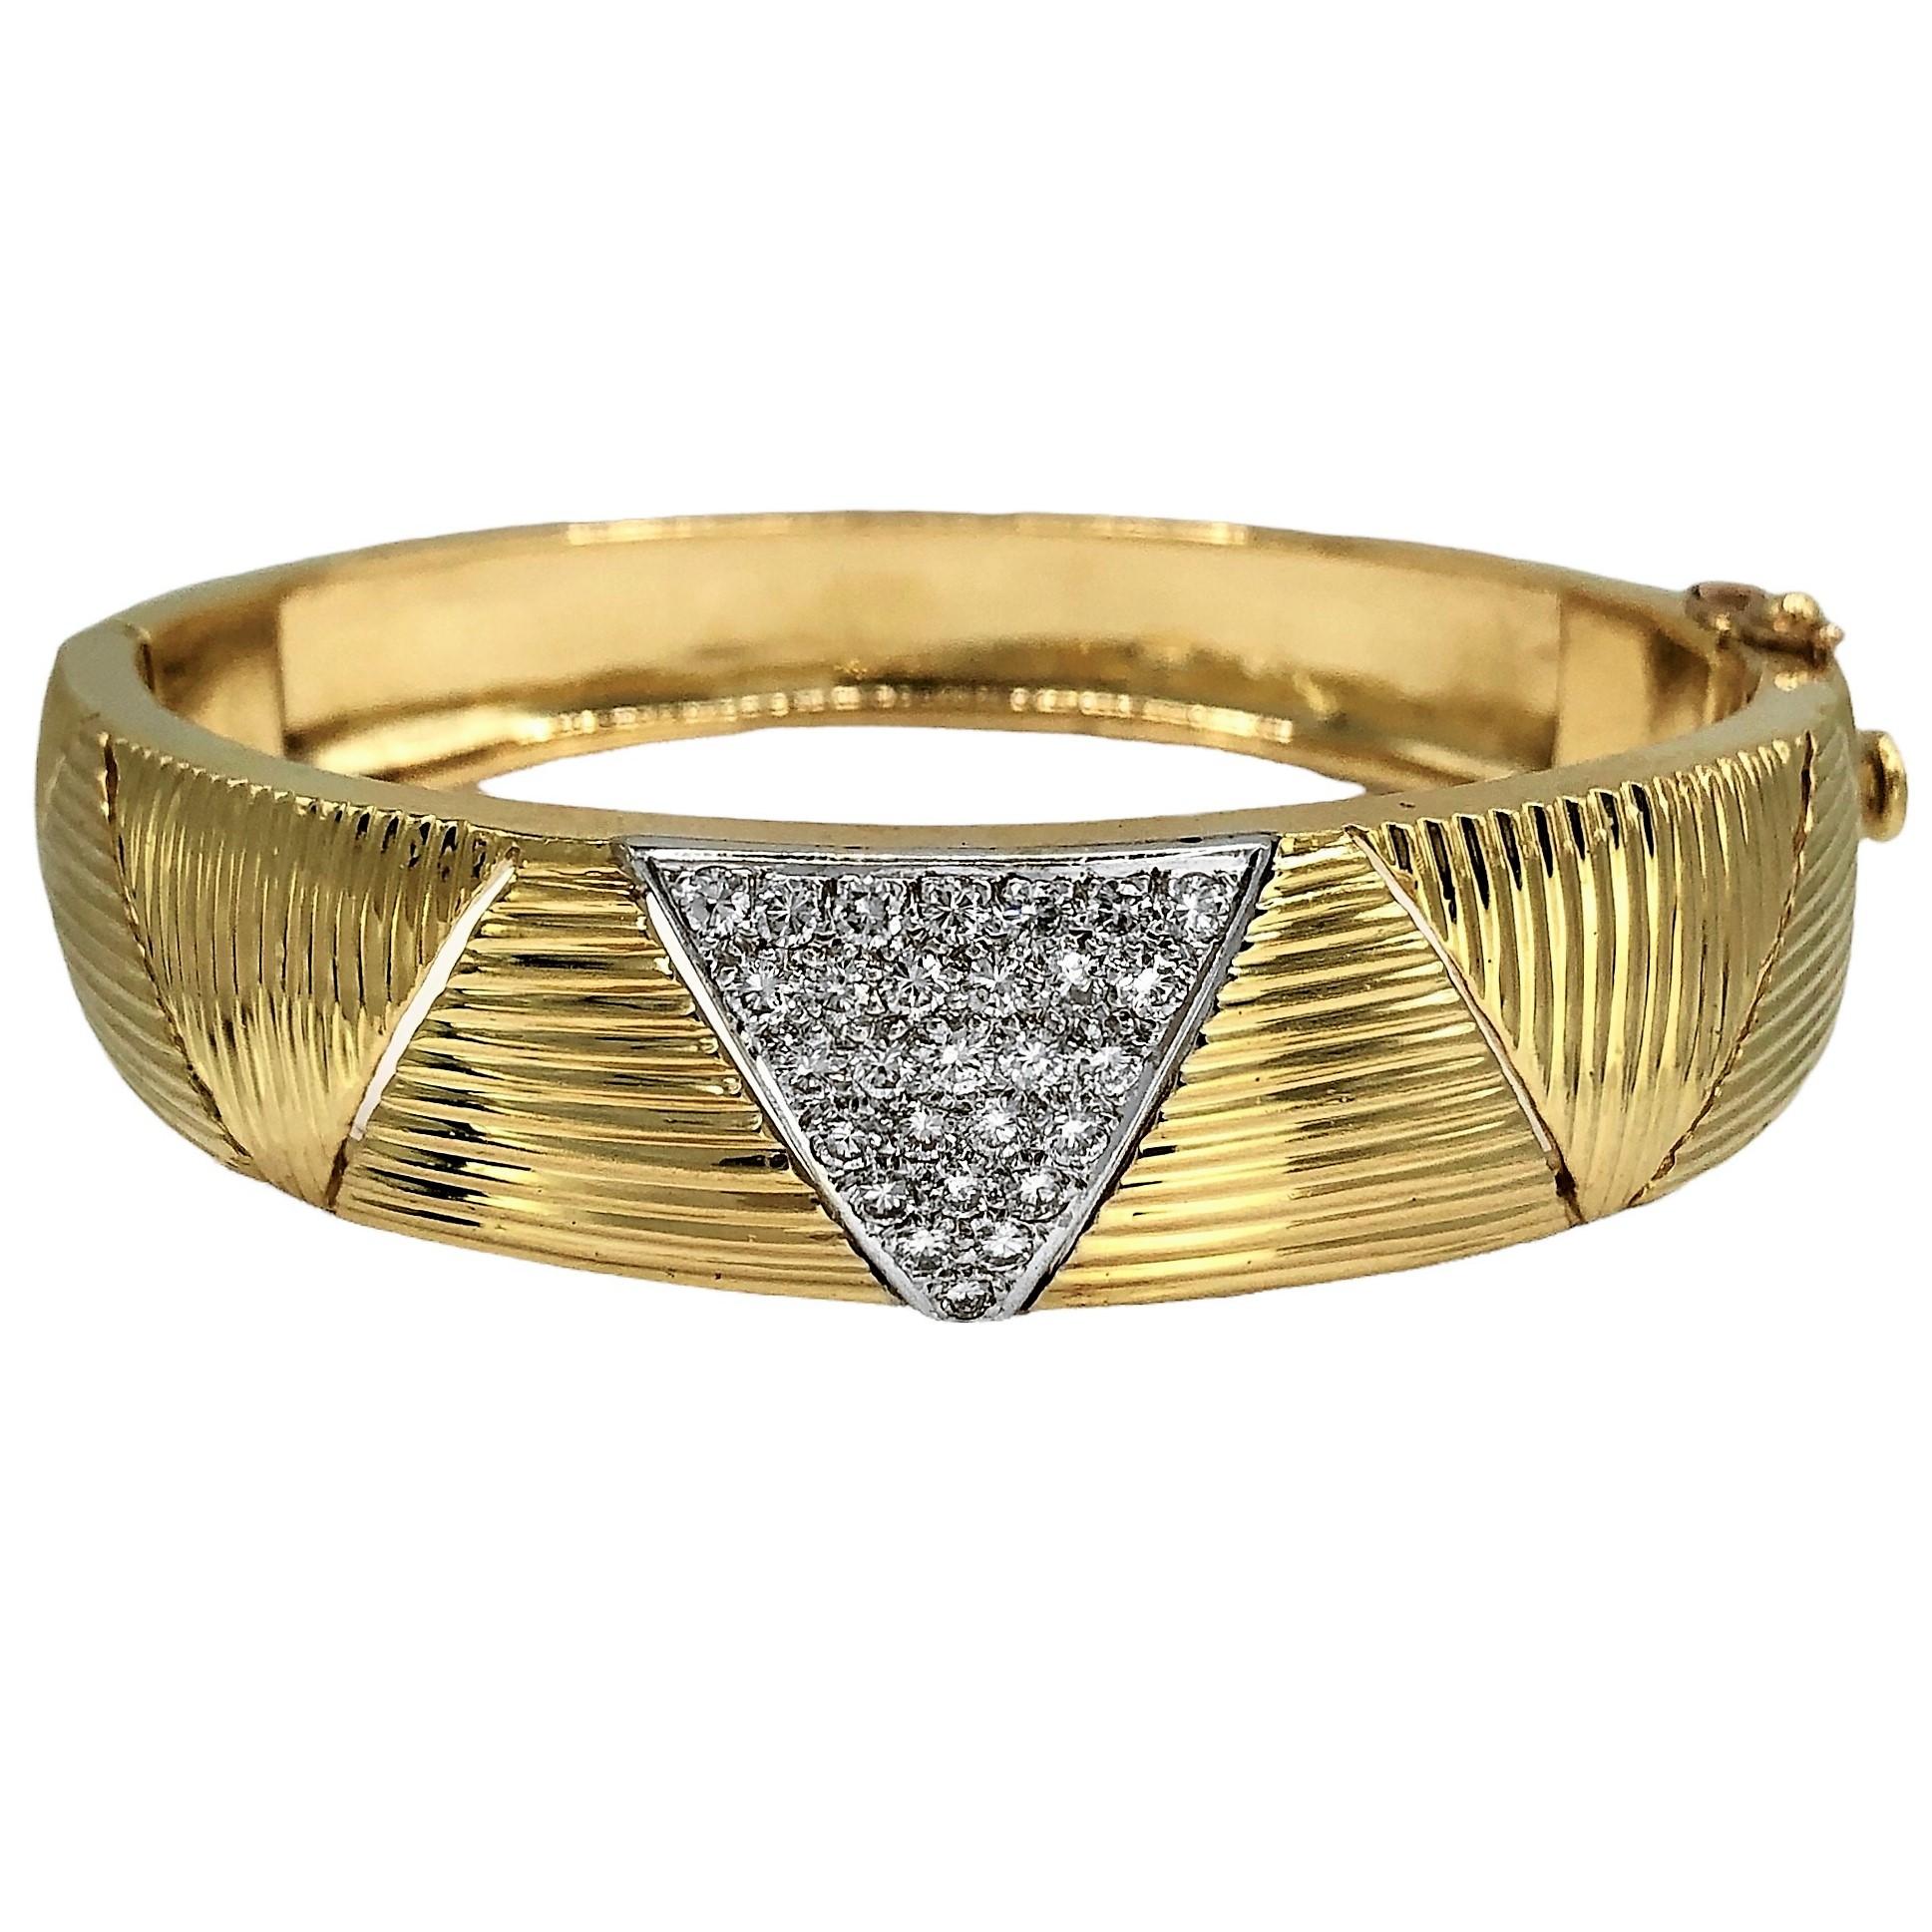 This beautifully executed 18k gold bangle bracelet graduates at the center from a width of almost 5/8 inches in width to 3/8 inches at the rear. One prominent pave triangle motif at the front is set with twenty eight brilliant cut diamonds with a